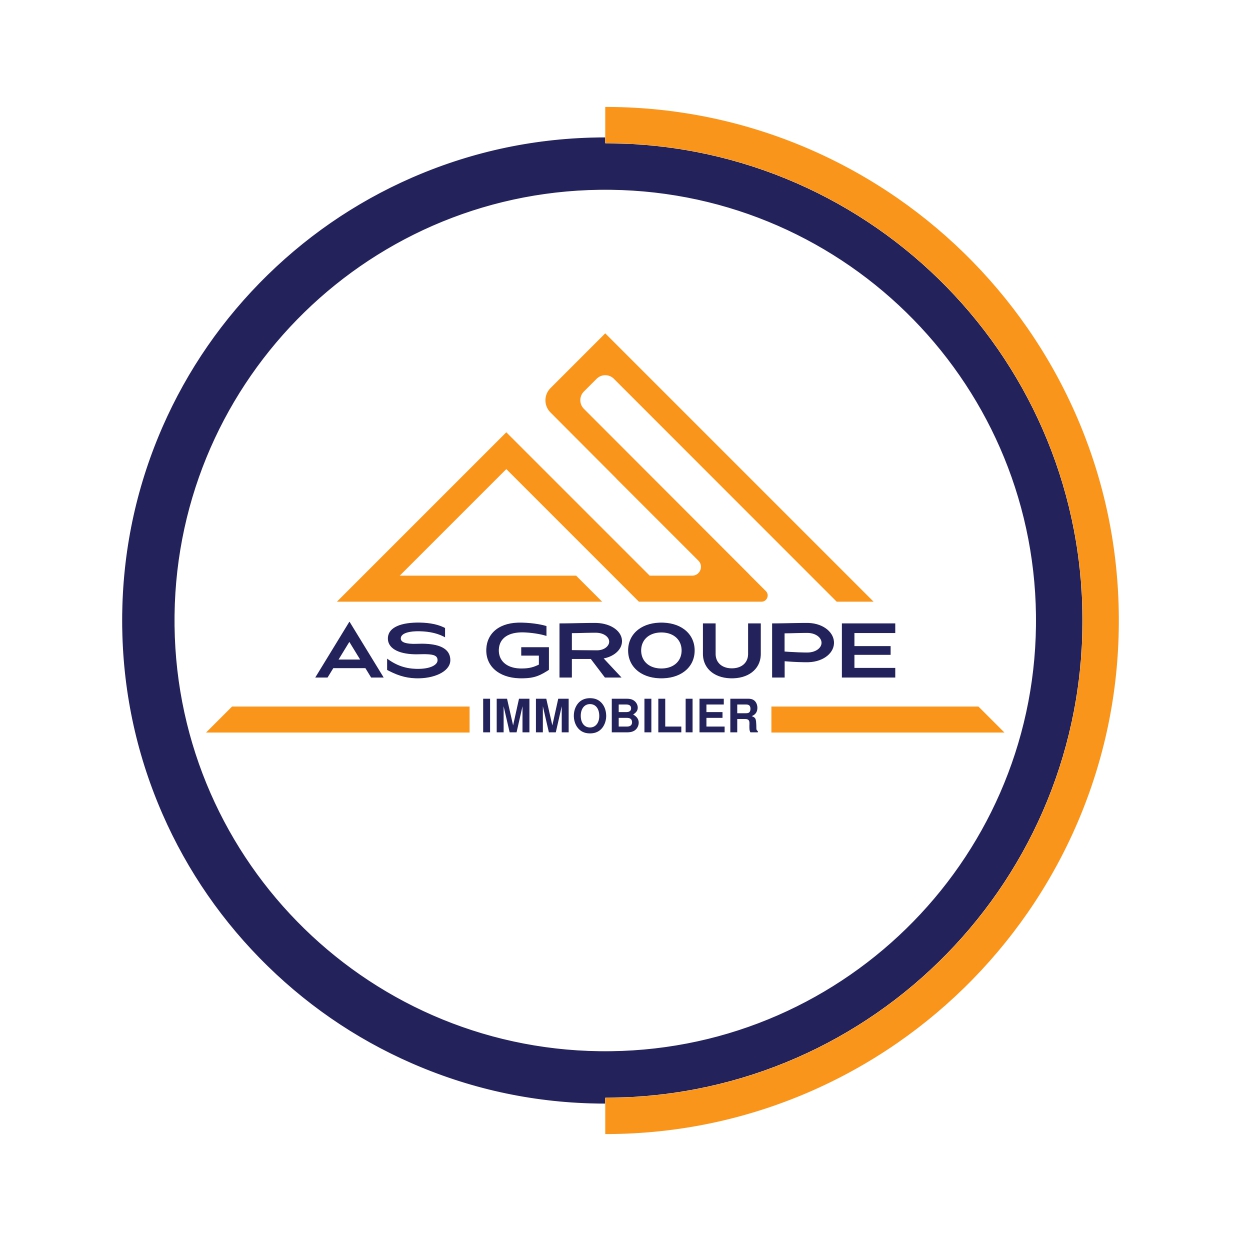 As Groupe Immobilier